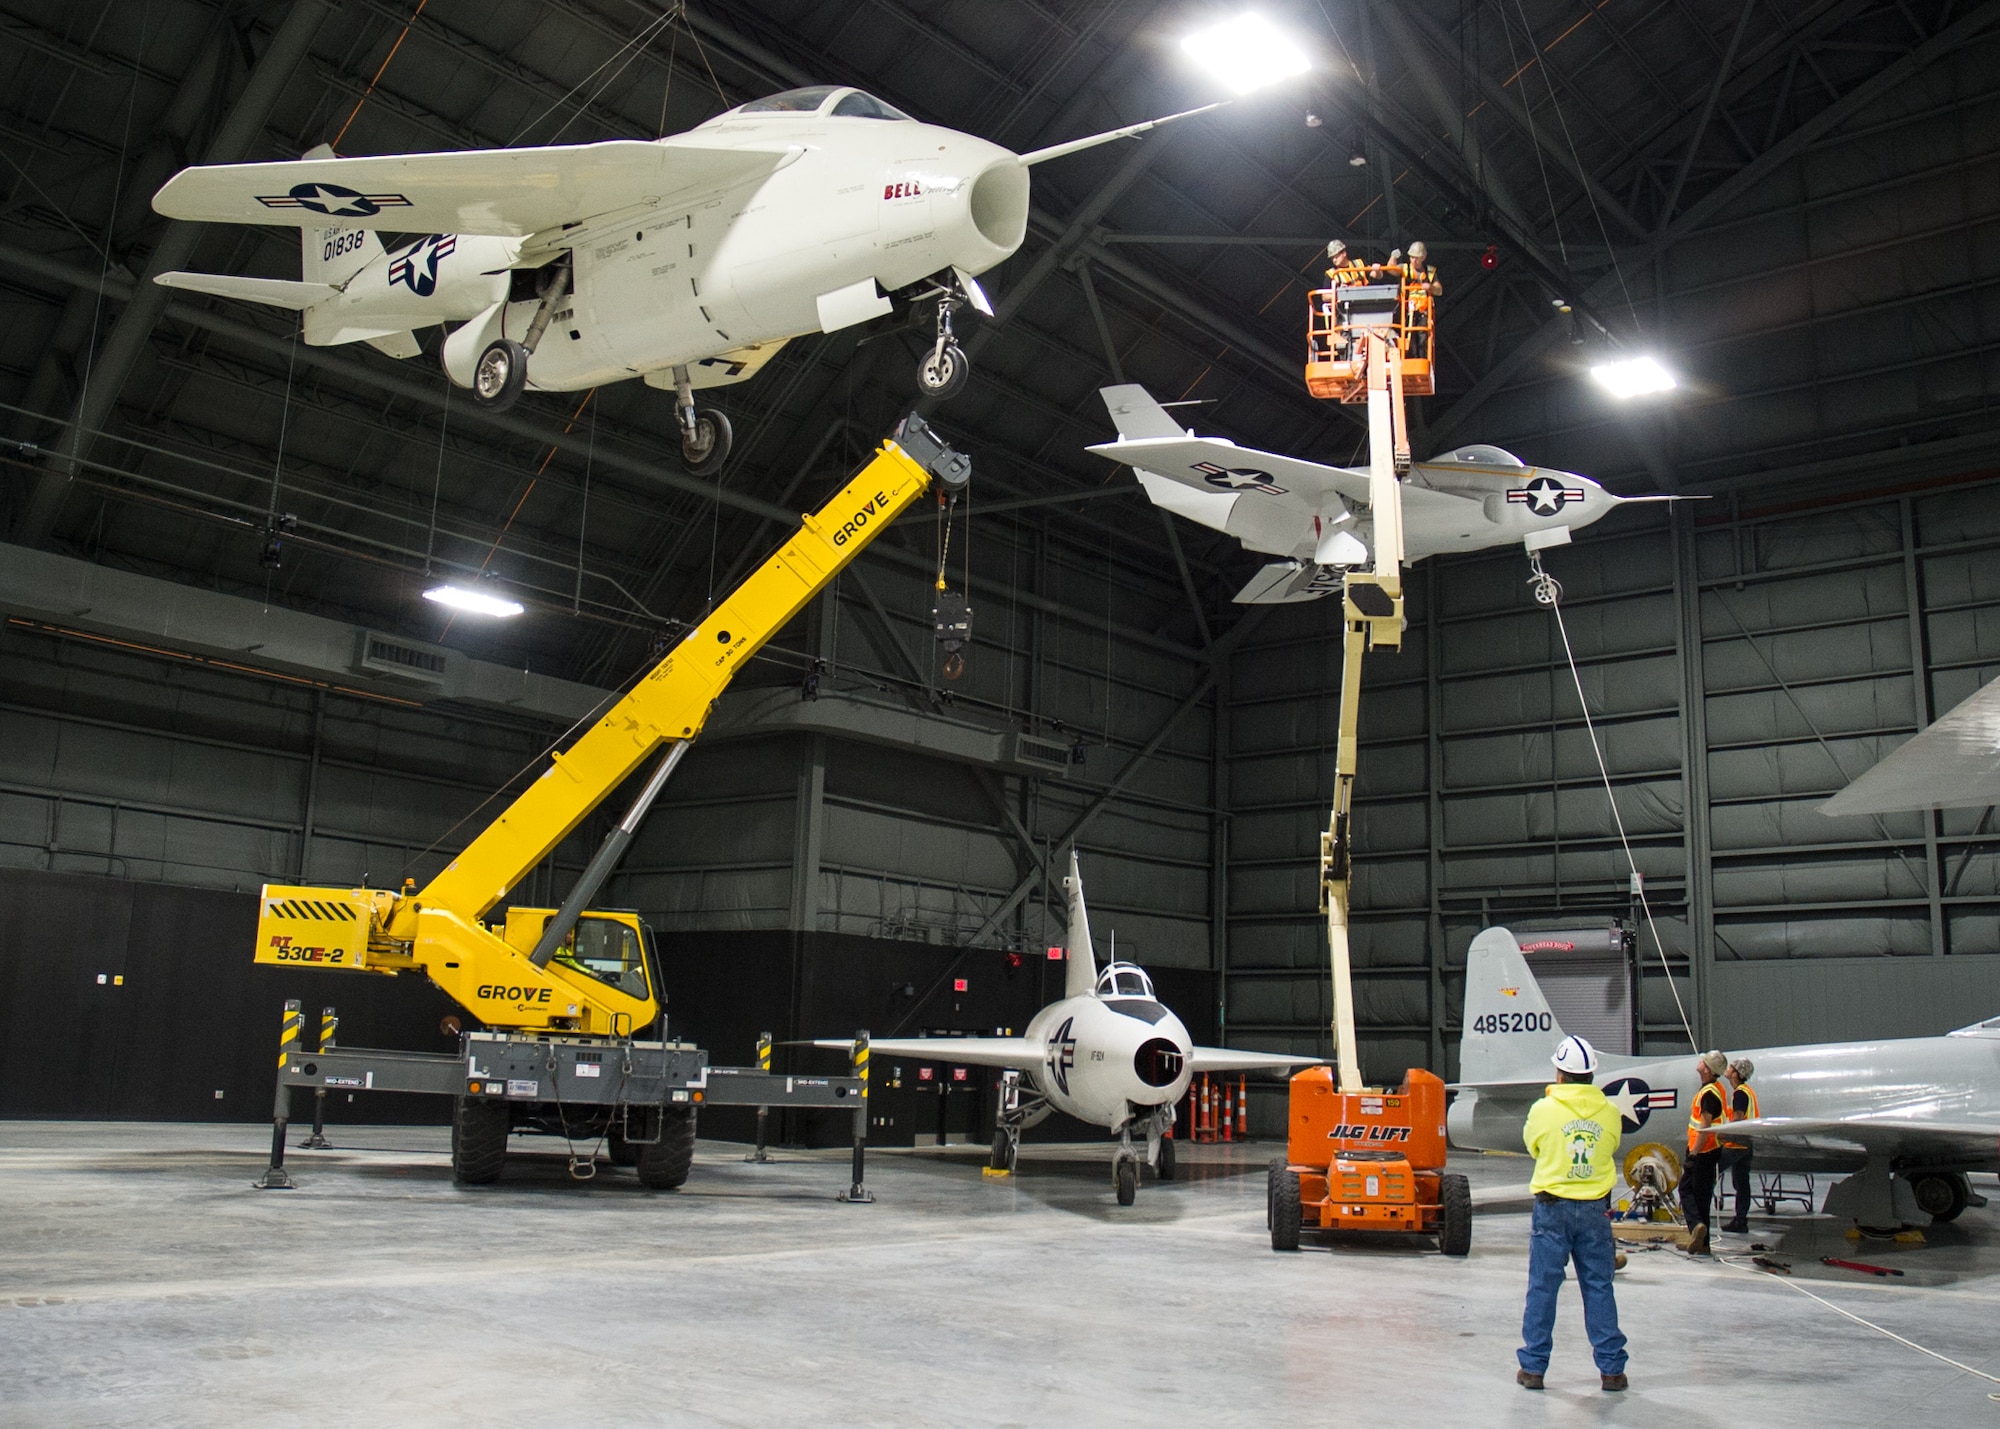 Restoration staff move R&D aircraft into position within the new fourth building at the National Museum of the U.S. Air Force in November 2015. (U.S. Air Force photo)